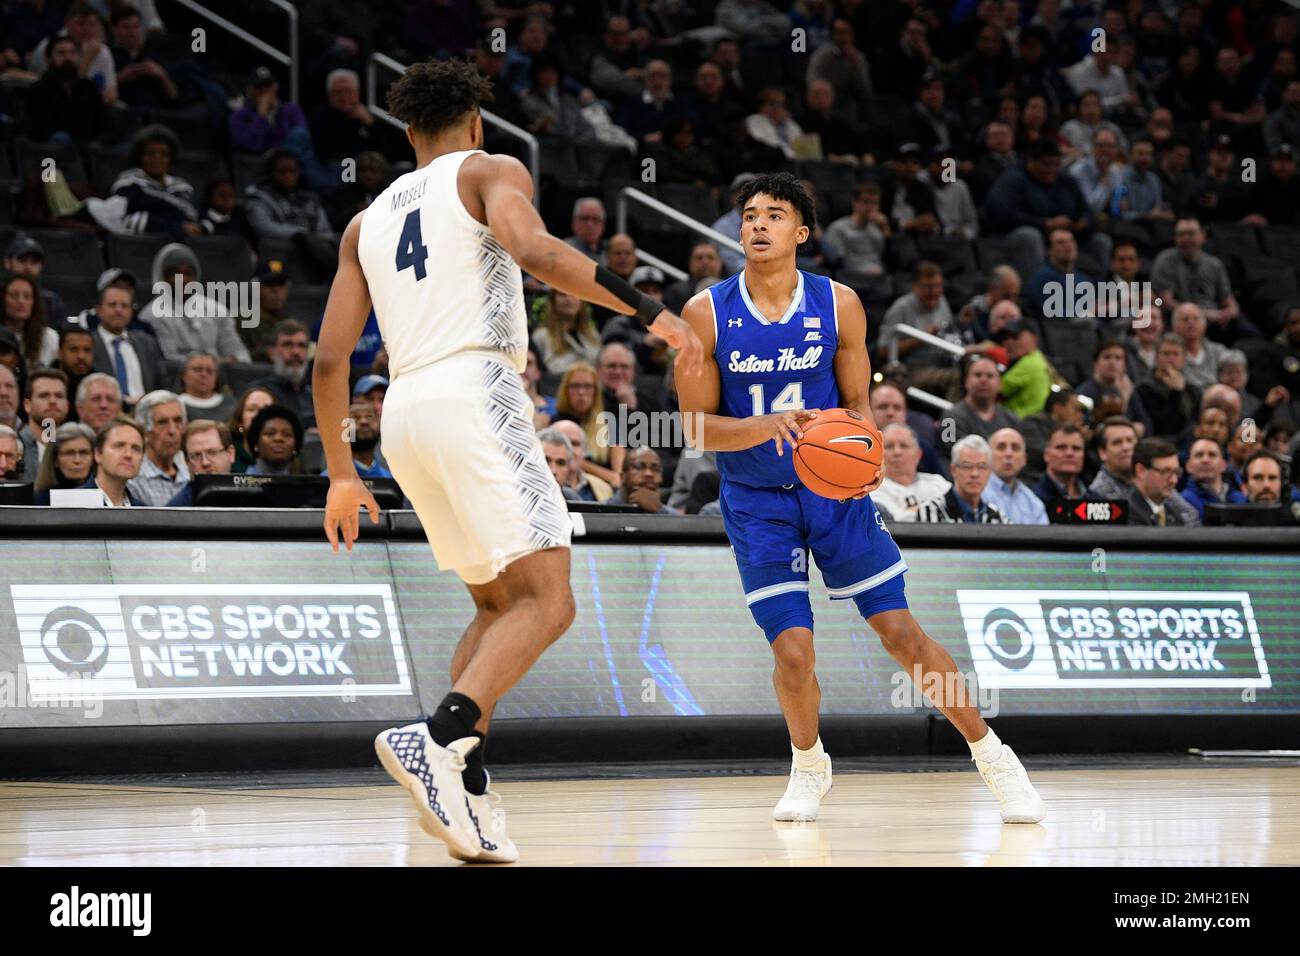 Seton Hall guard Jared Rhoden (14) handles the ball against Georgetown guard Jagan Mosely (4) during the first half of an NCAA college basketball game, Wednesday, Feb. 5, 2020, in Washington. (AP Photo/Nick Wass) Stock Photo